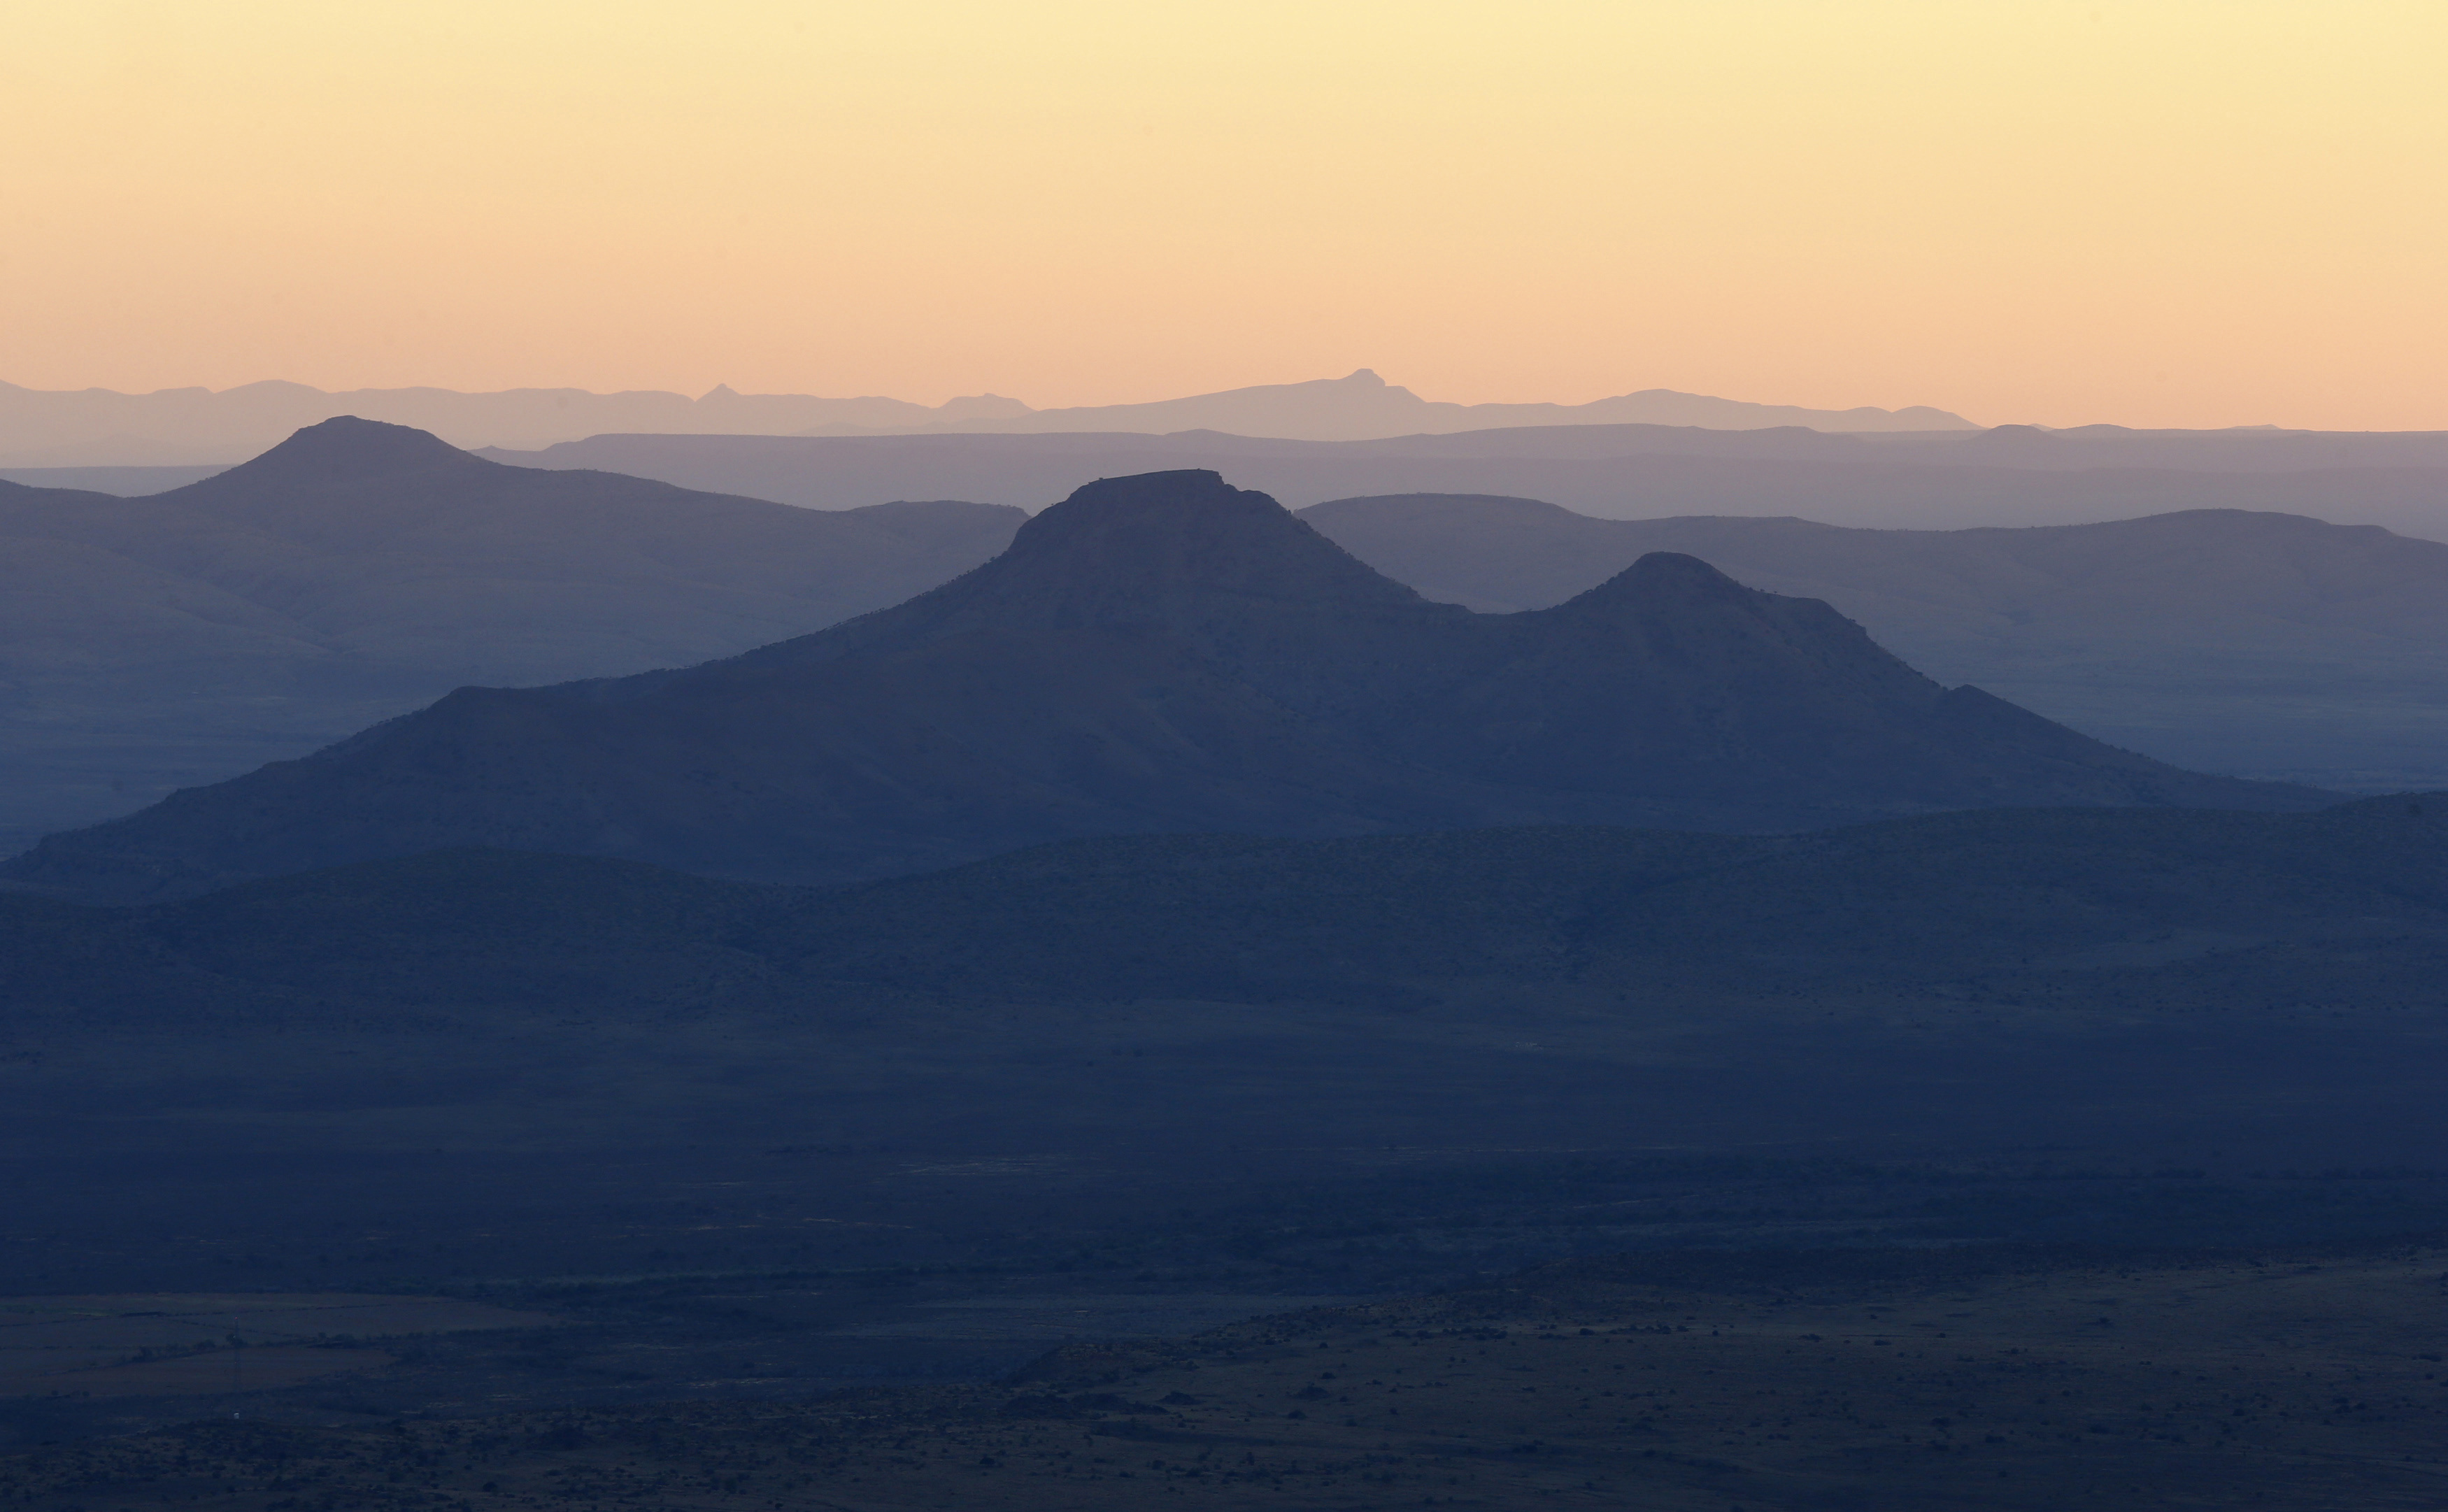 Sun sets over the Valley of Desolation near Graaff Reinet in the Karoo